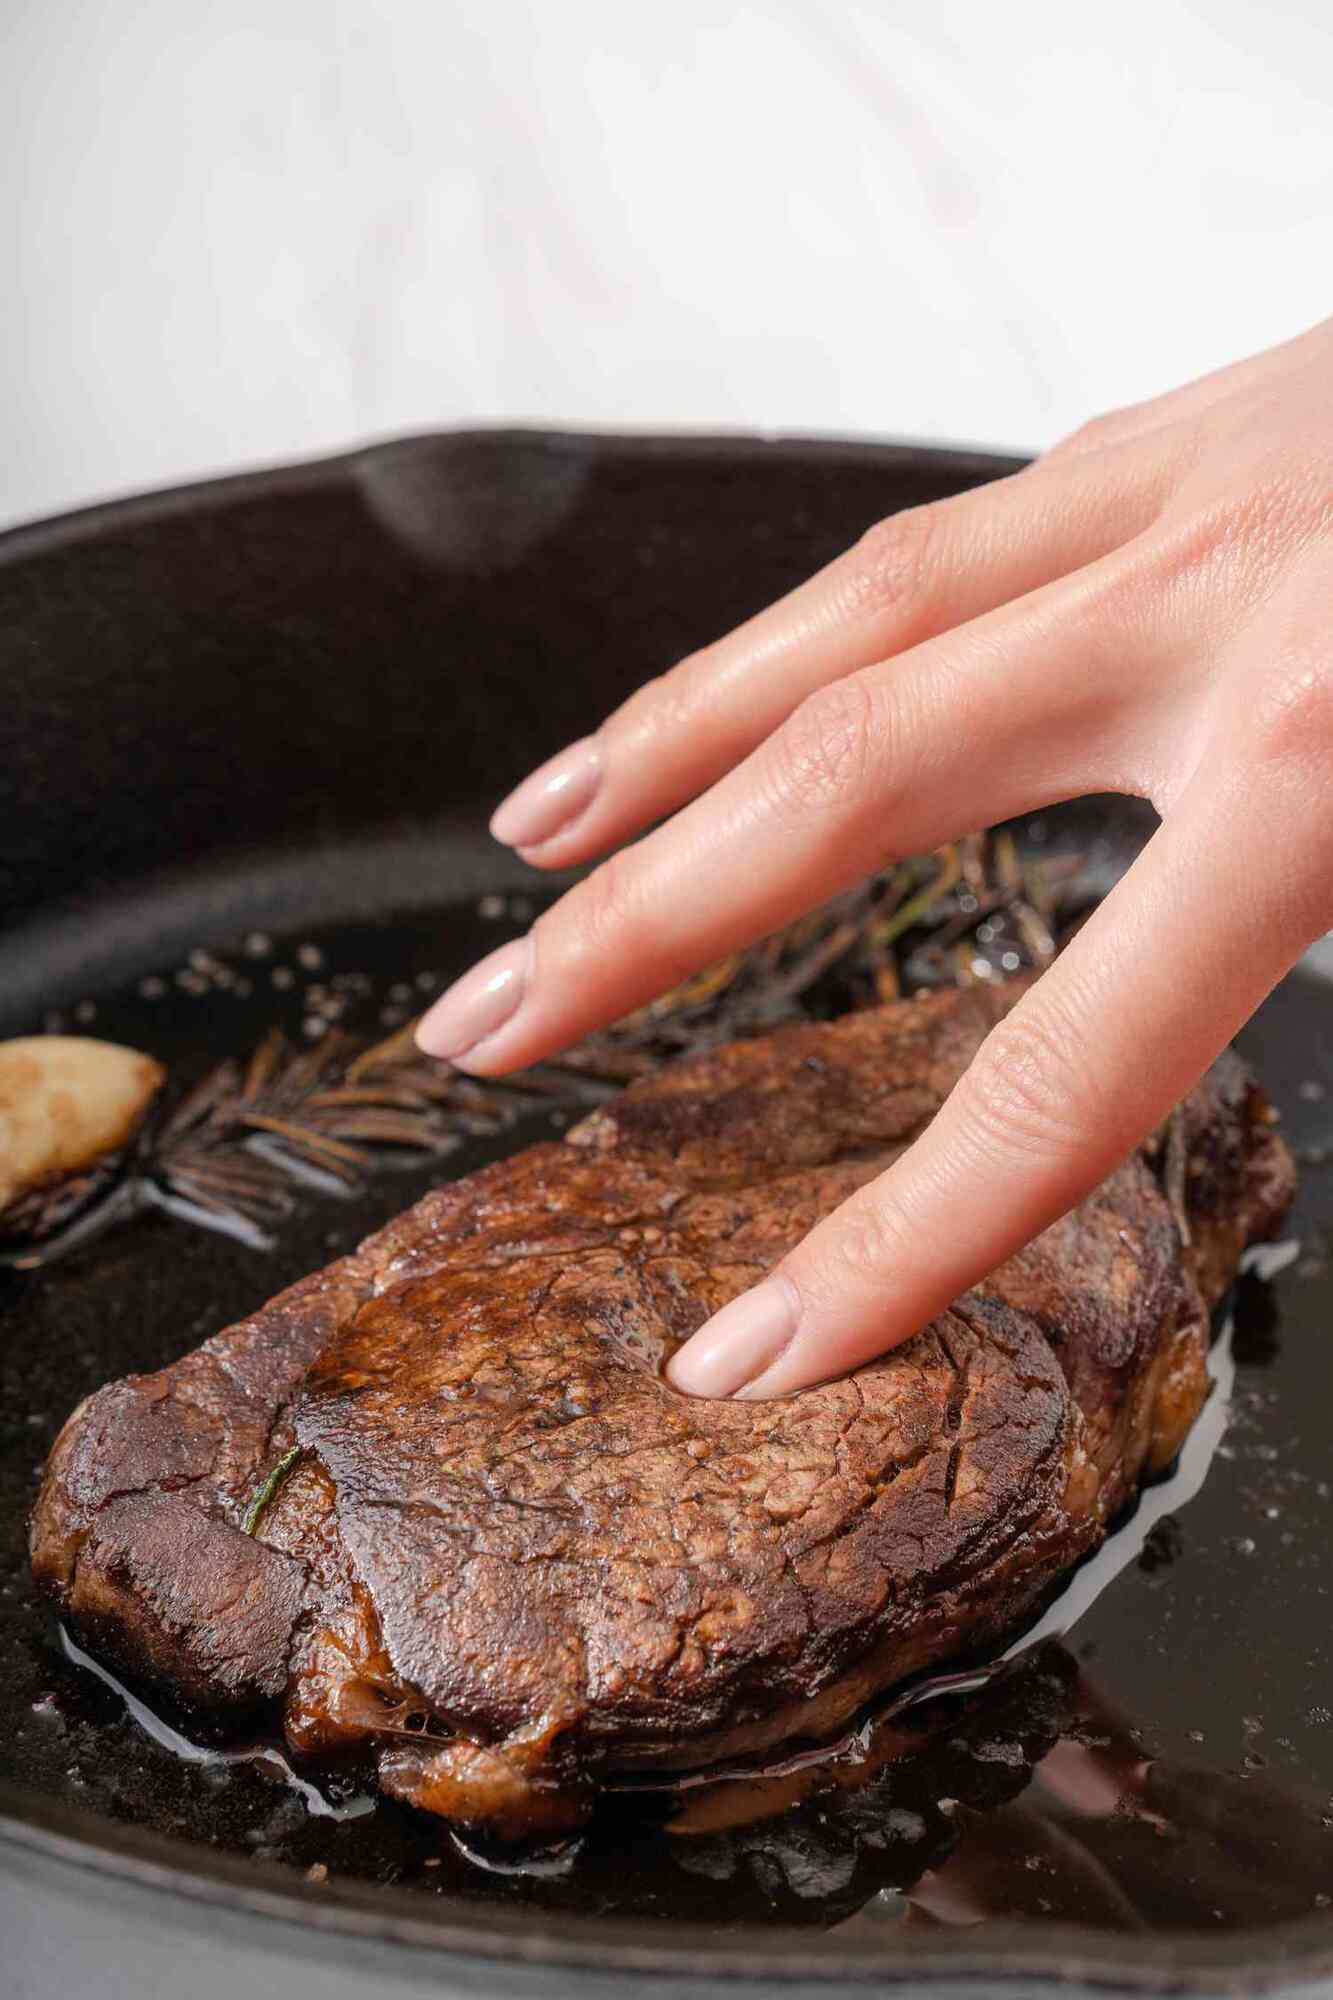 The steak will turn out tough and dry: never cook it that way